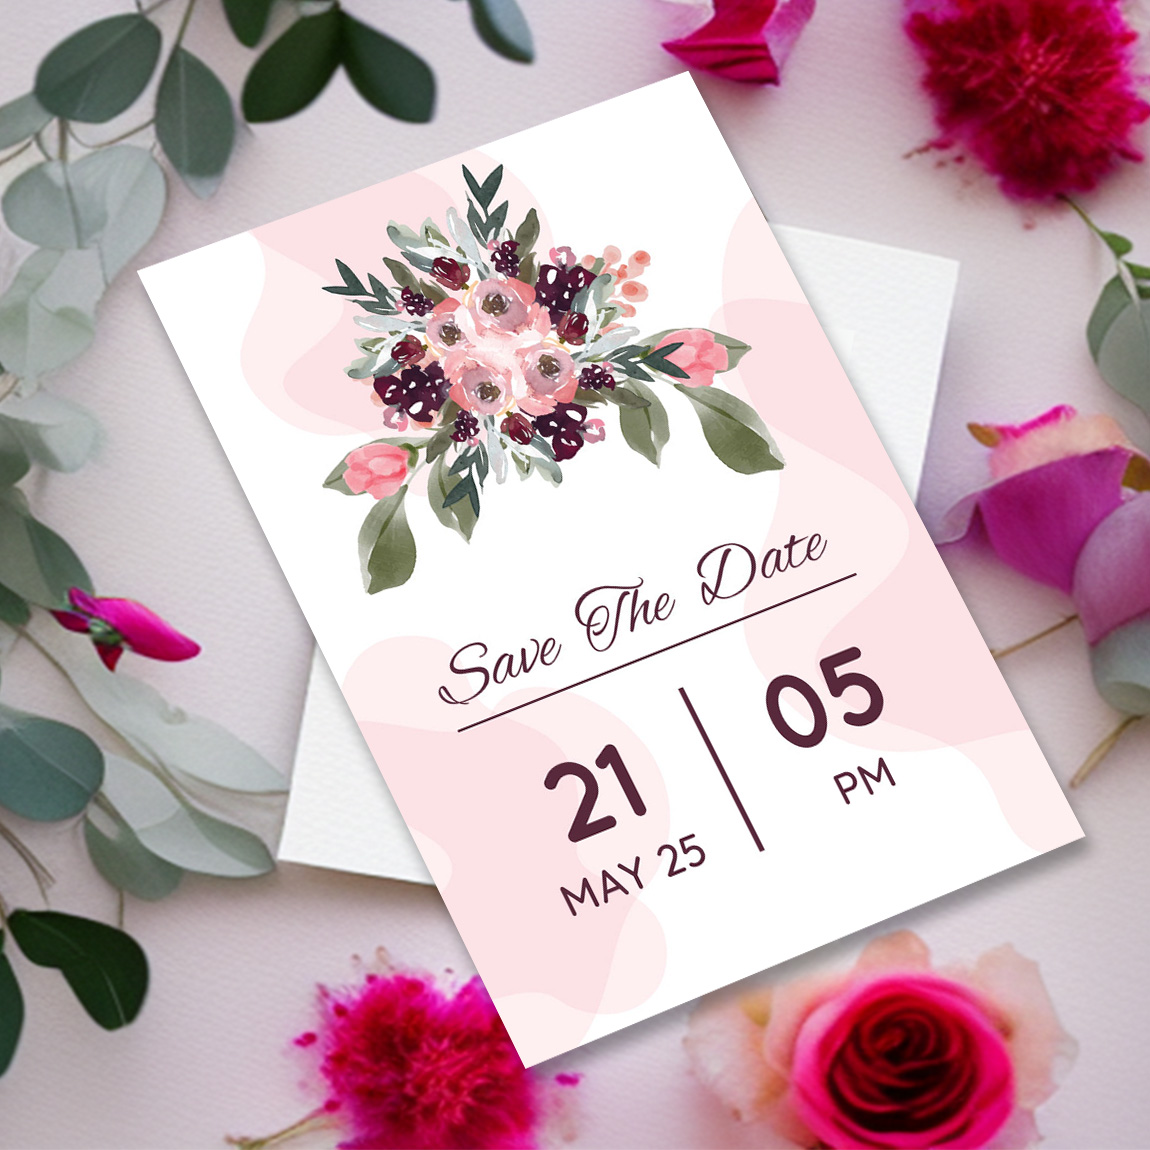 Image of an exquisite wedding invitation in combination with flowers and leaves.